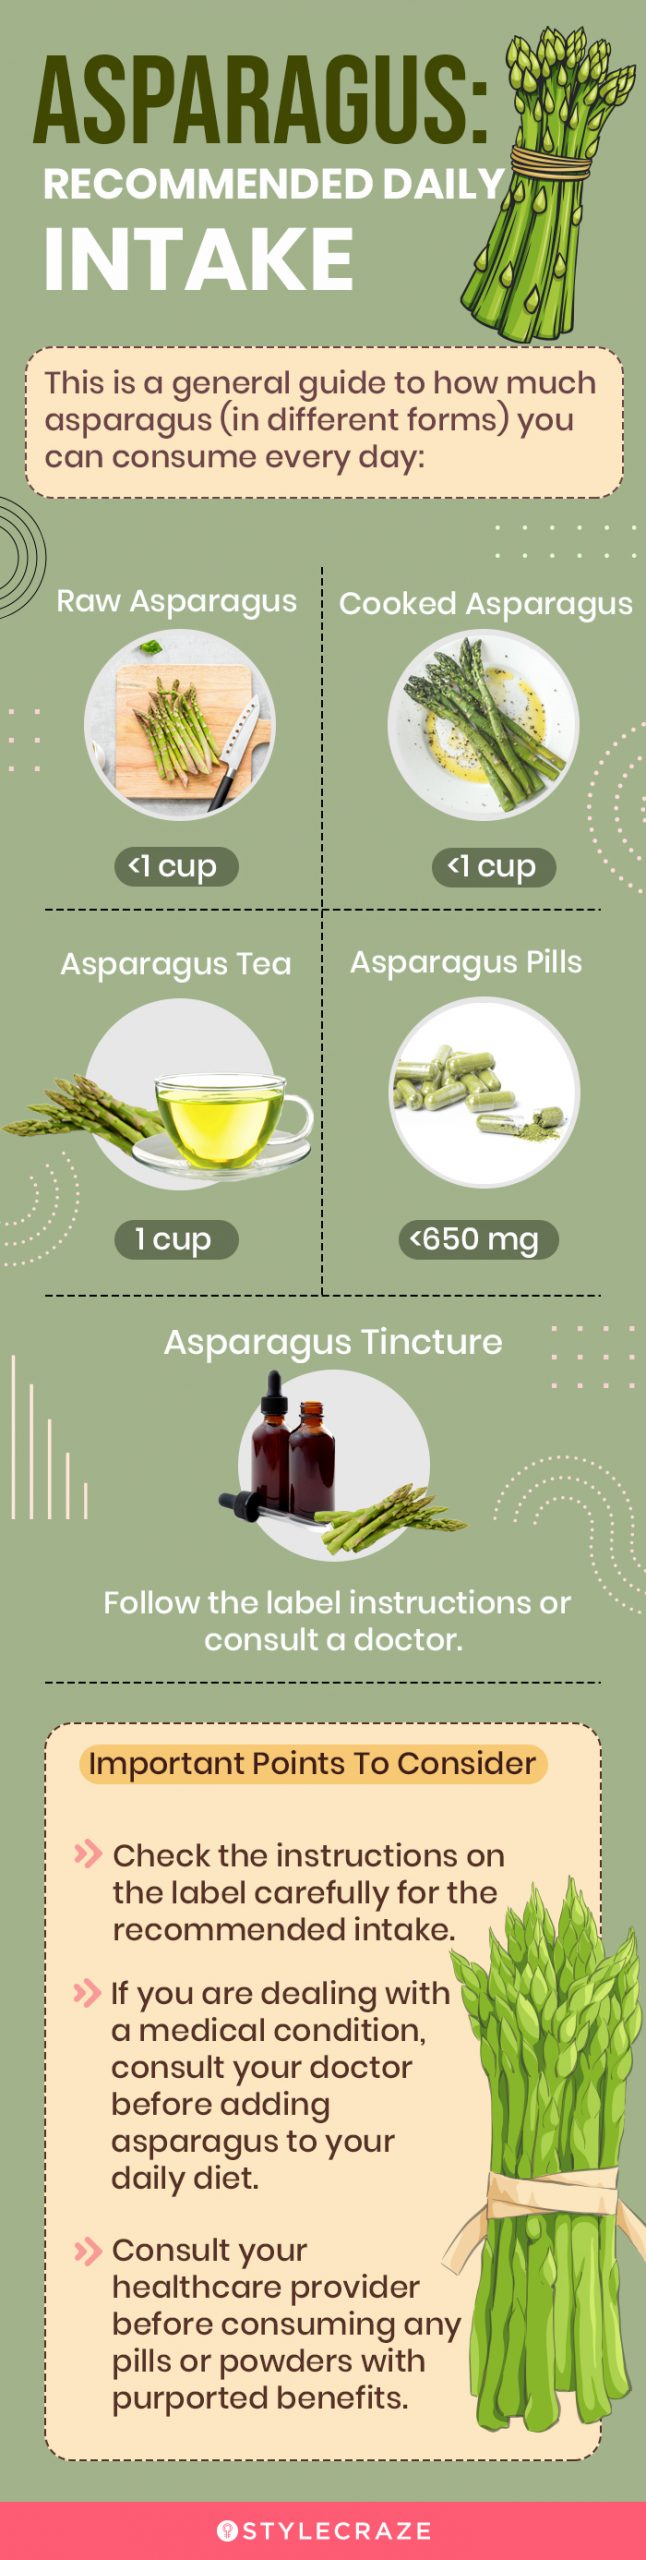 asparagus – recommended daily intake (infographic)